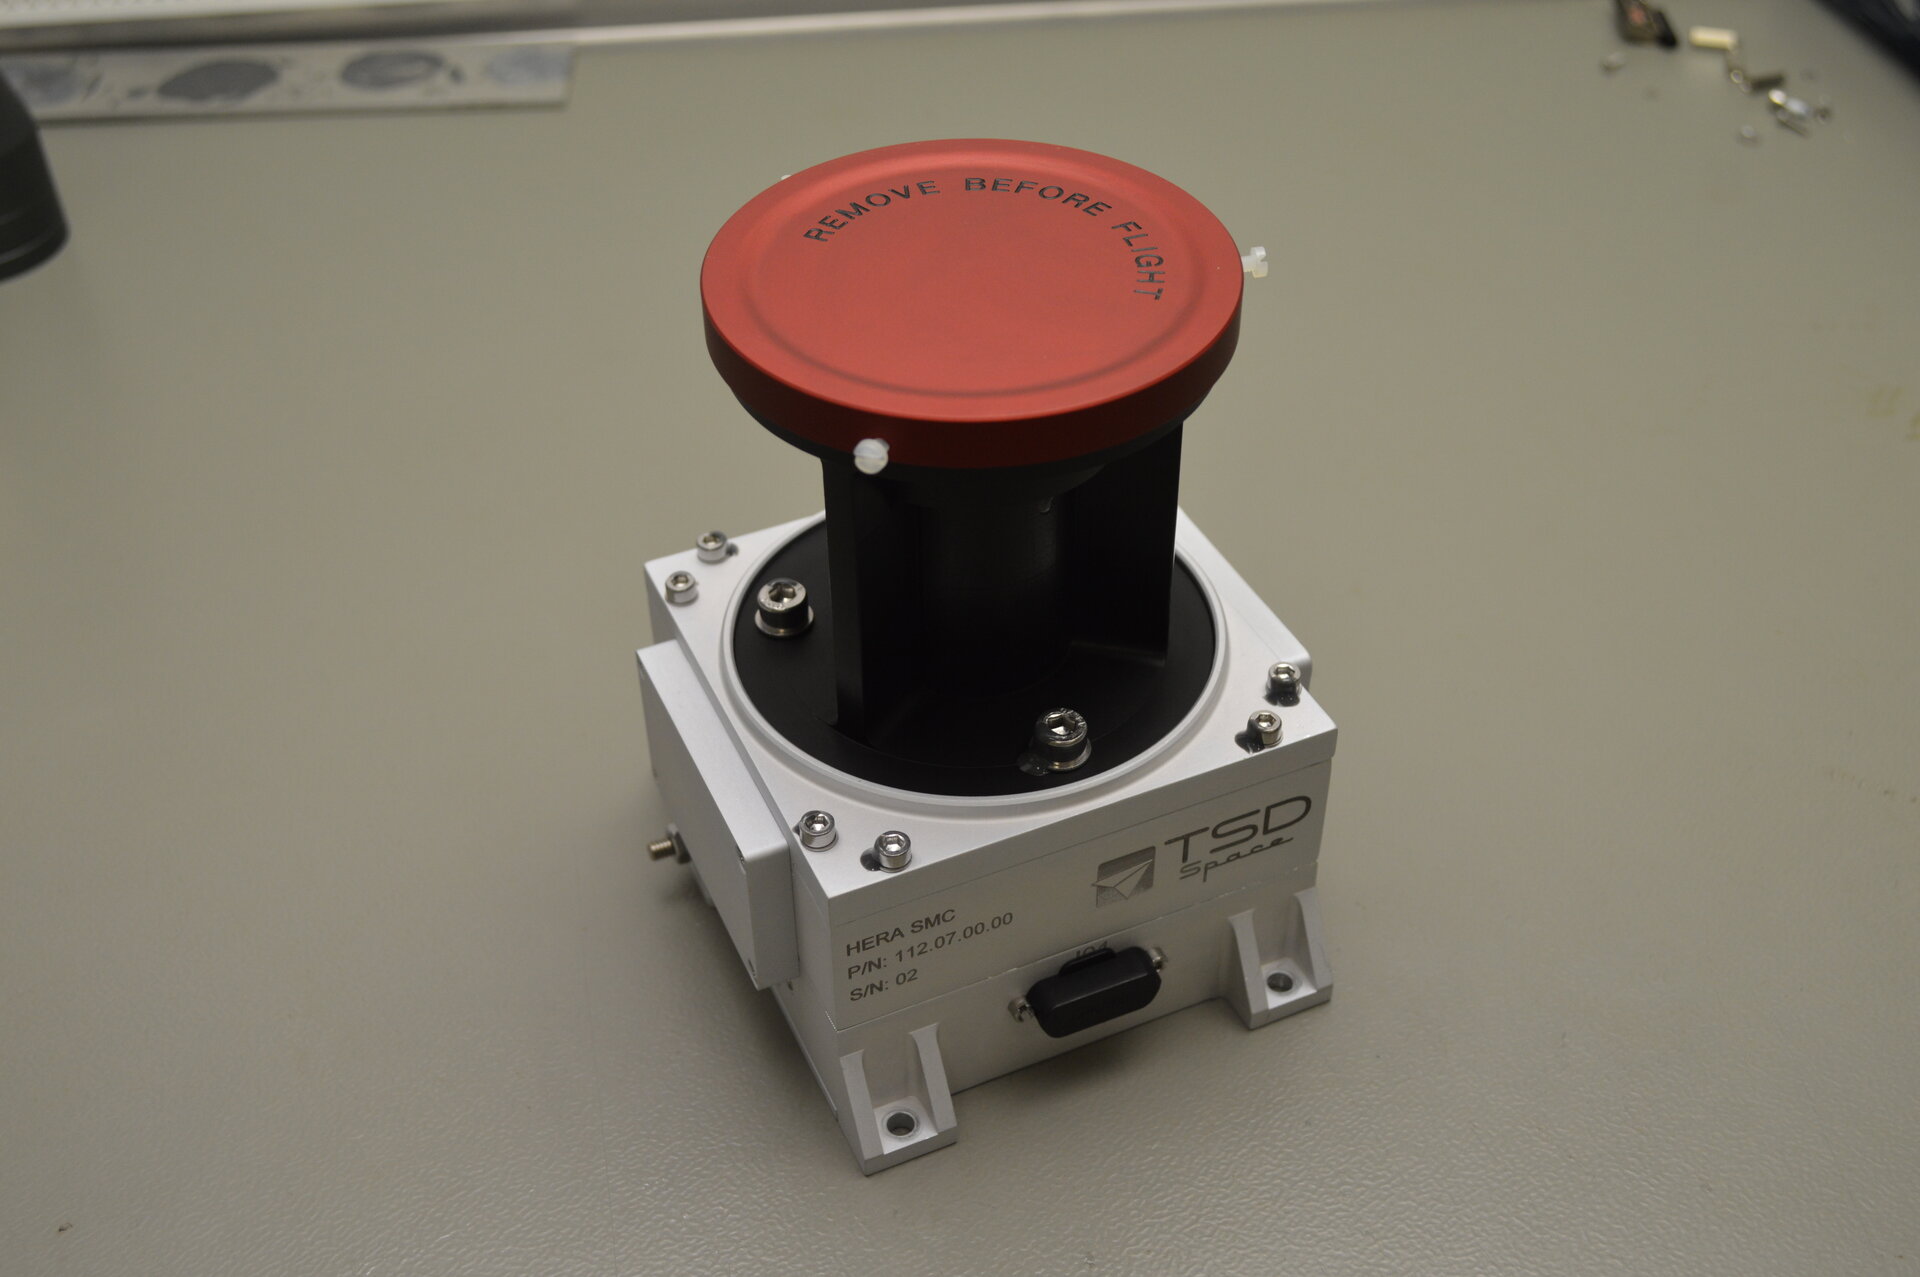 This spacecraft monitoring camera from TDS Space will monitor the deployment of Hera's CubeSats